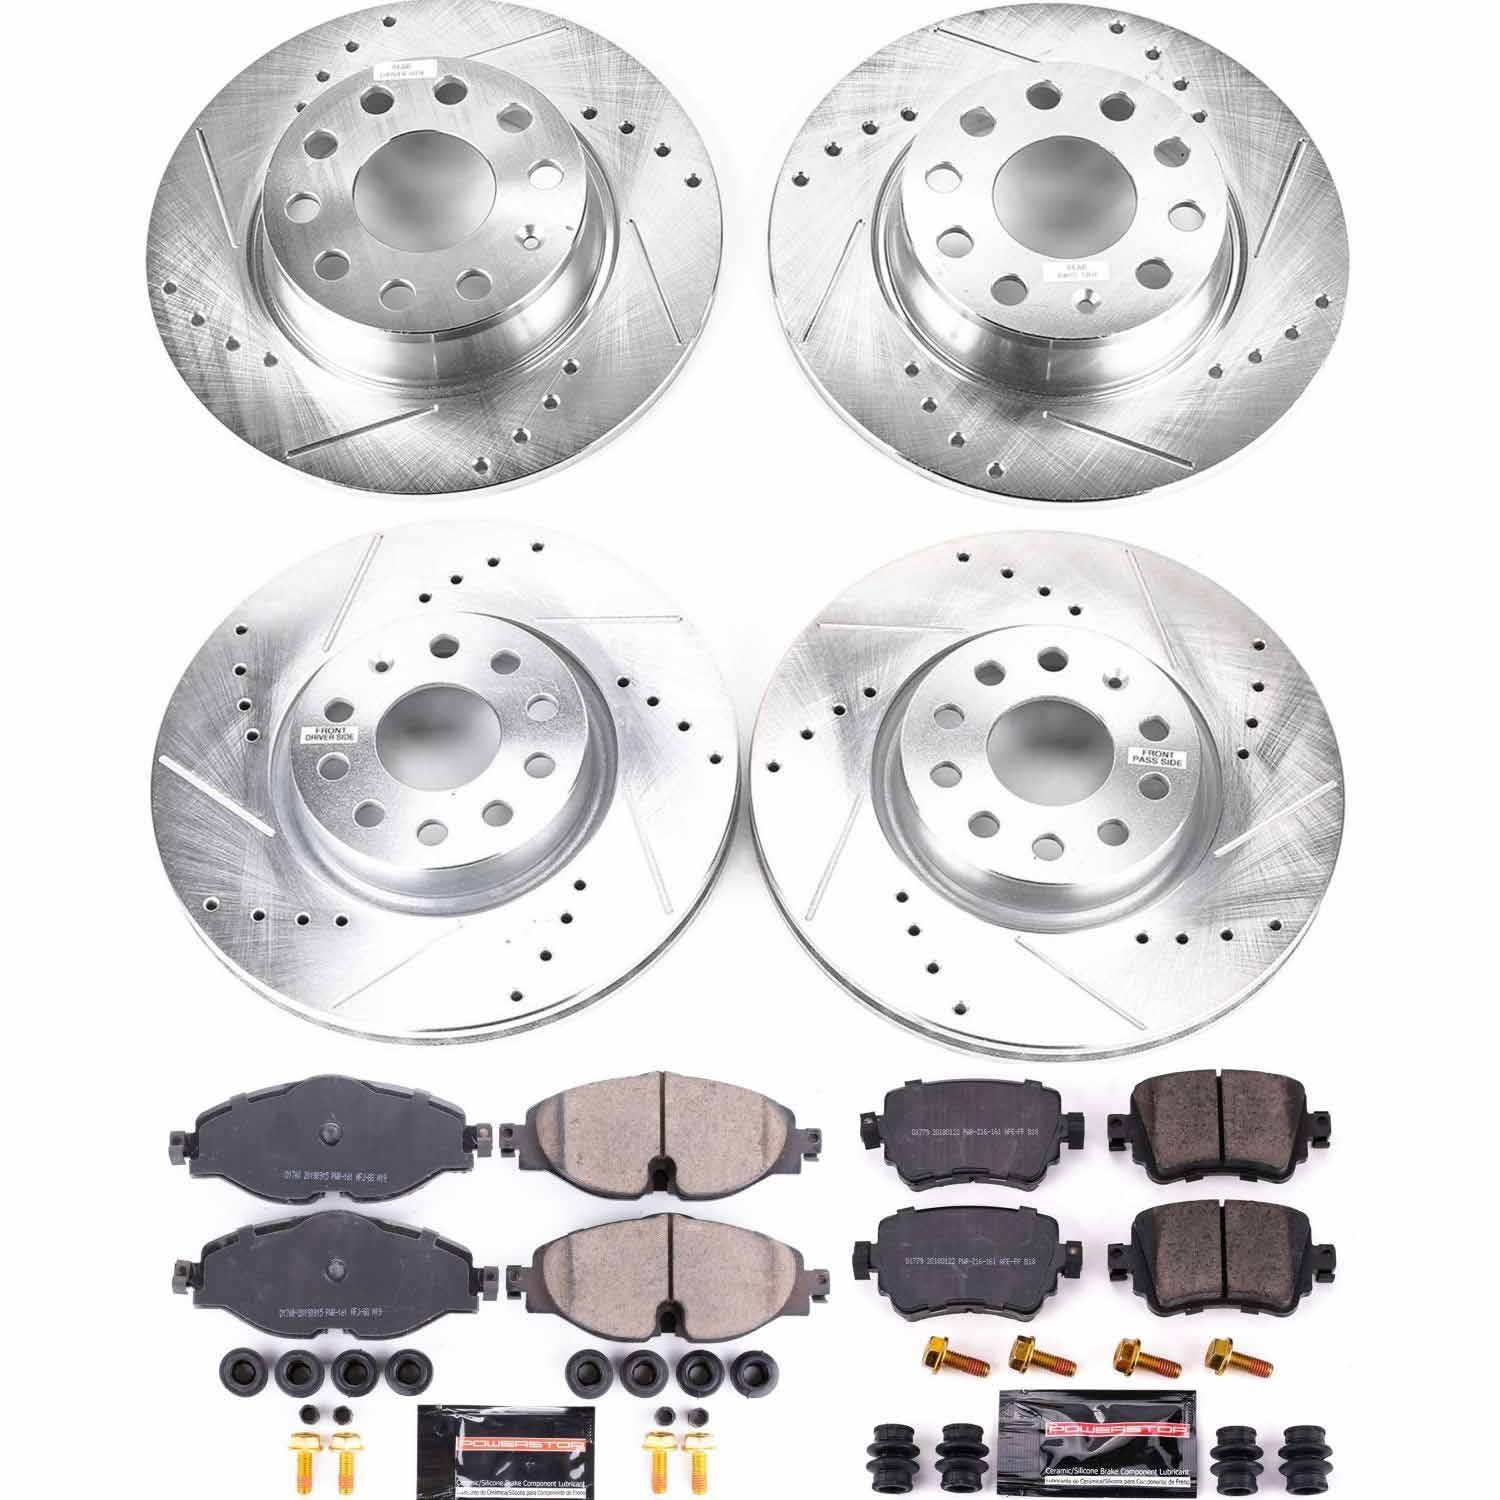 Z23 Front and Rear Brake Pads and Rotors Kit Fits Select Late Model Volkswagen Models